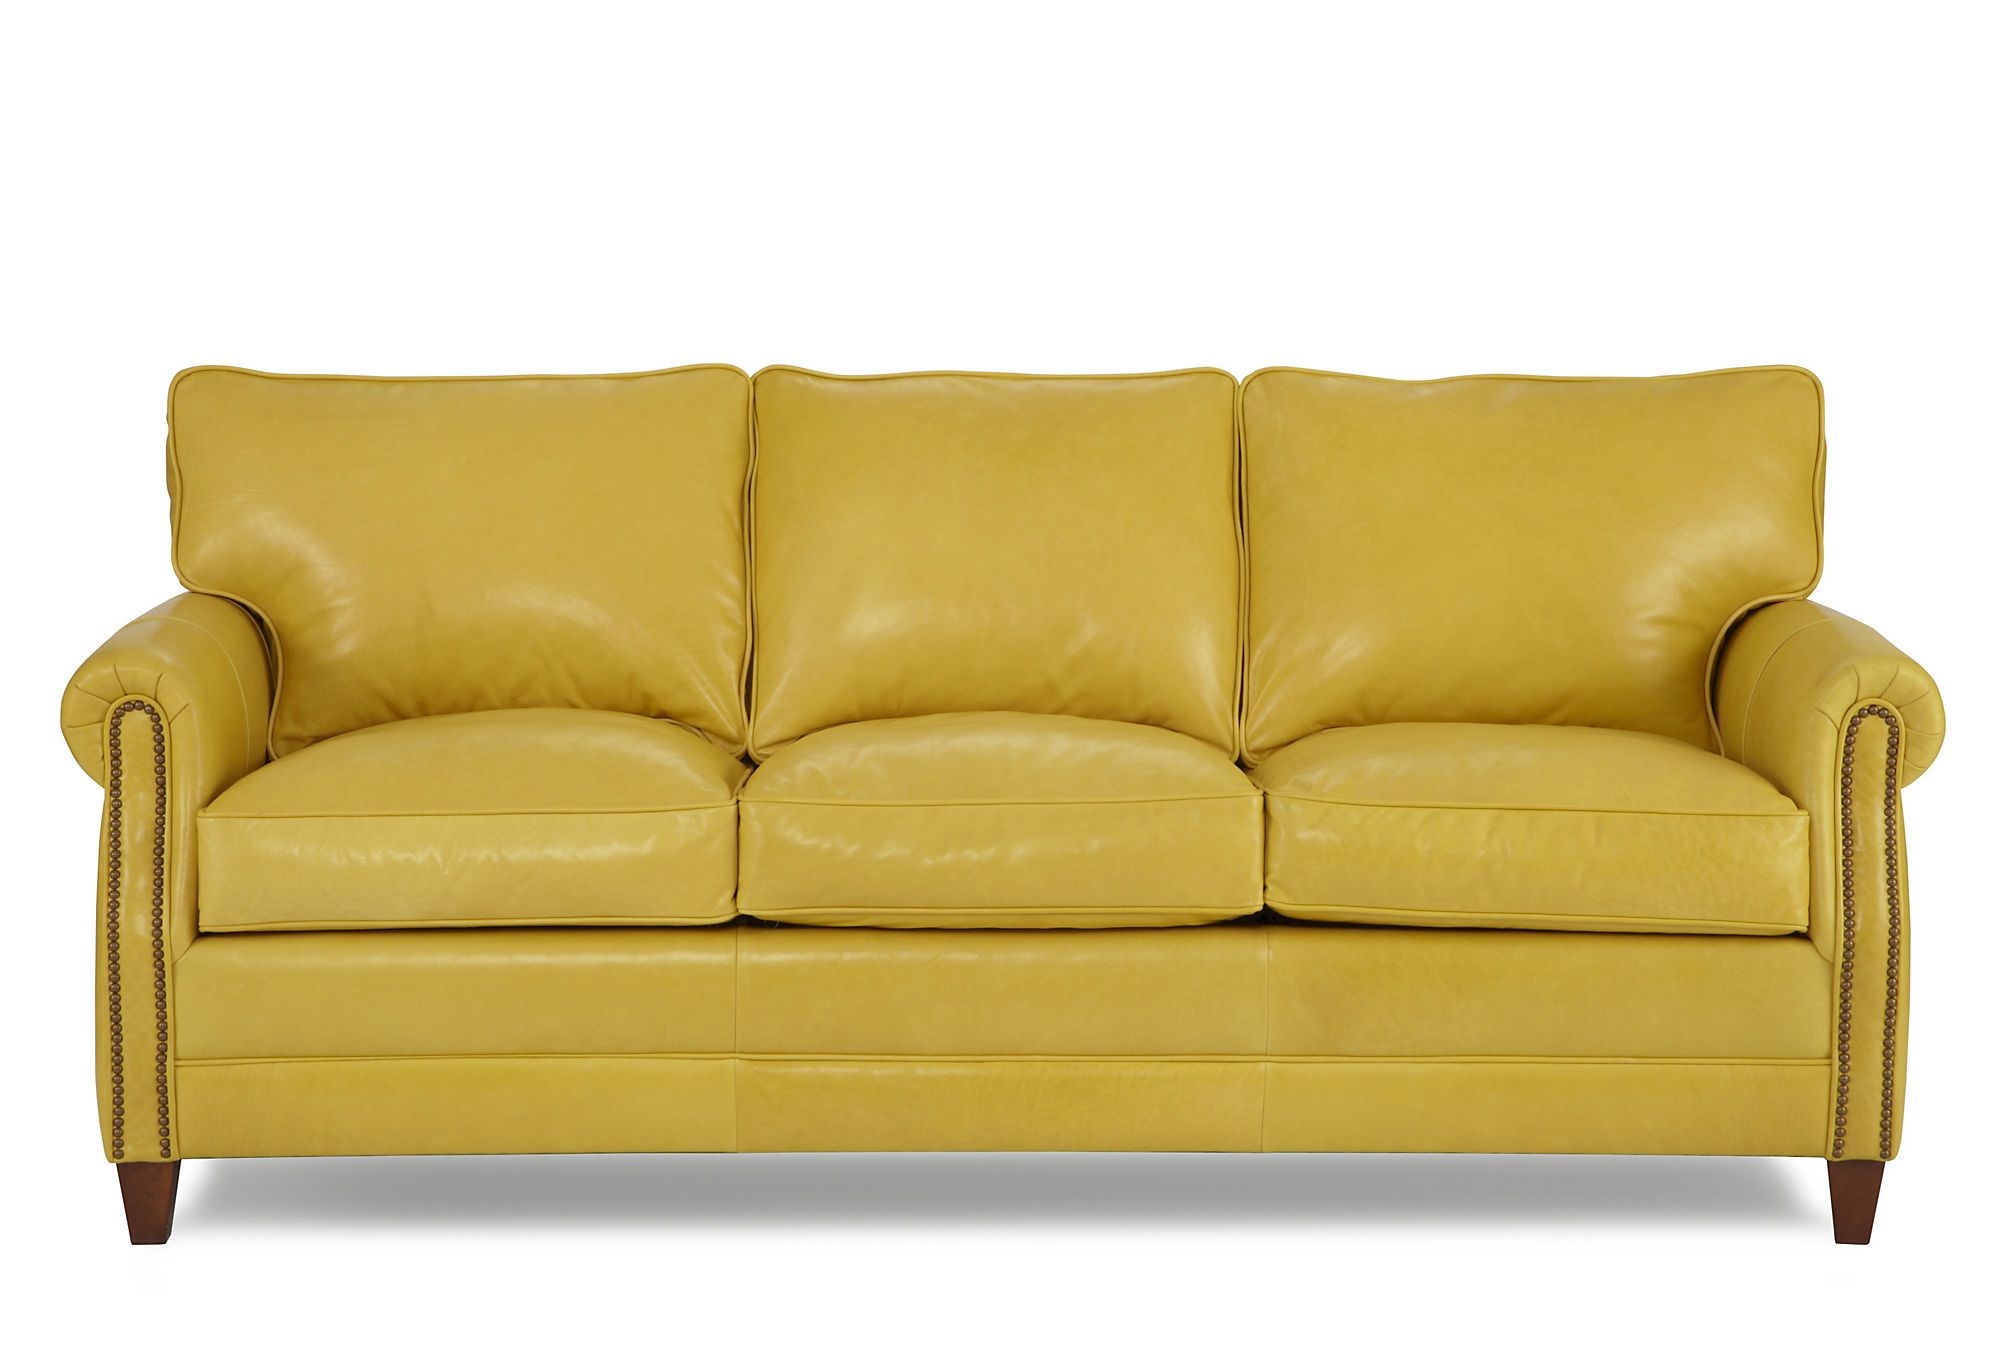 does anyone make a yellow leather sofa